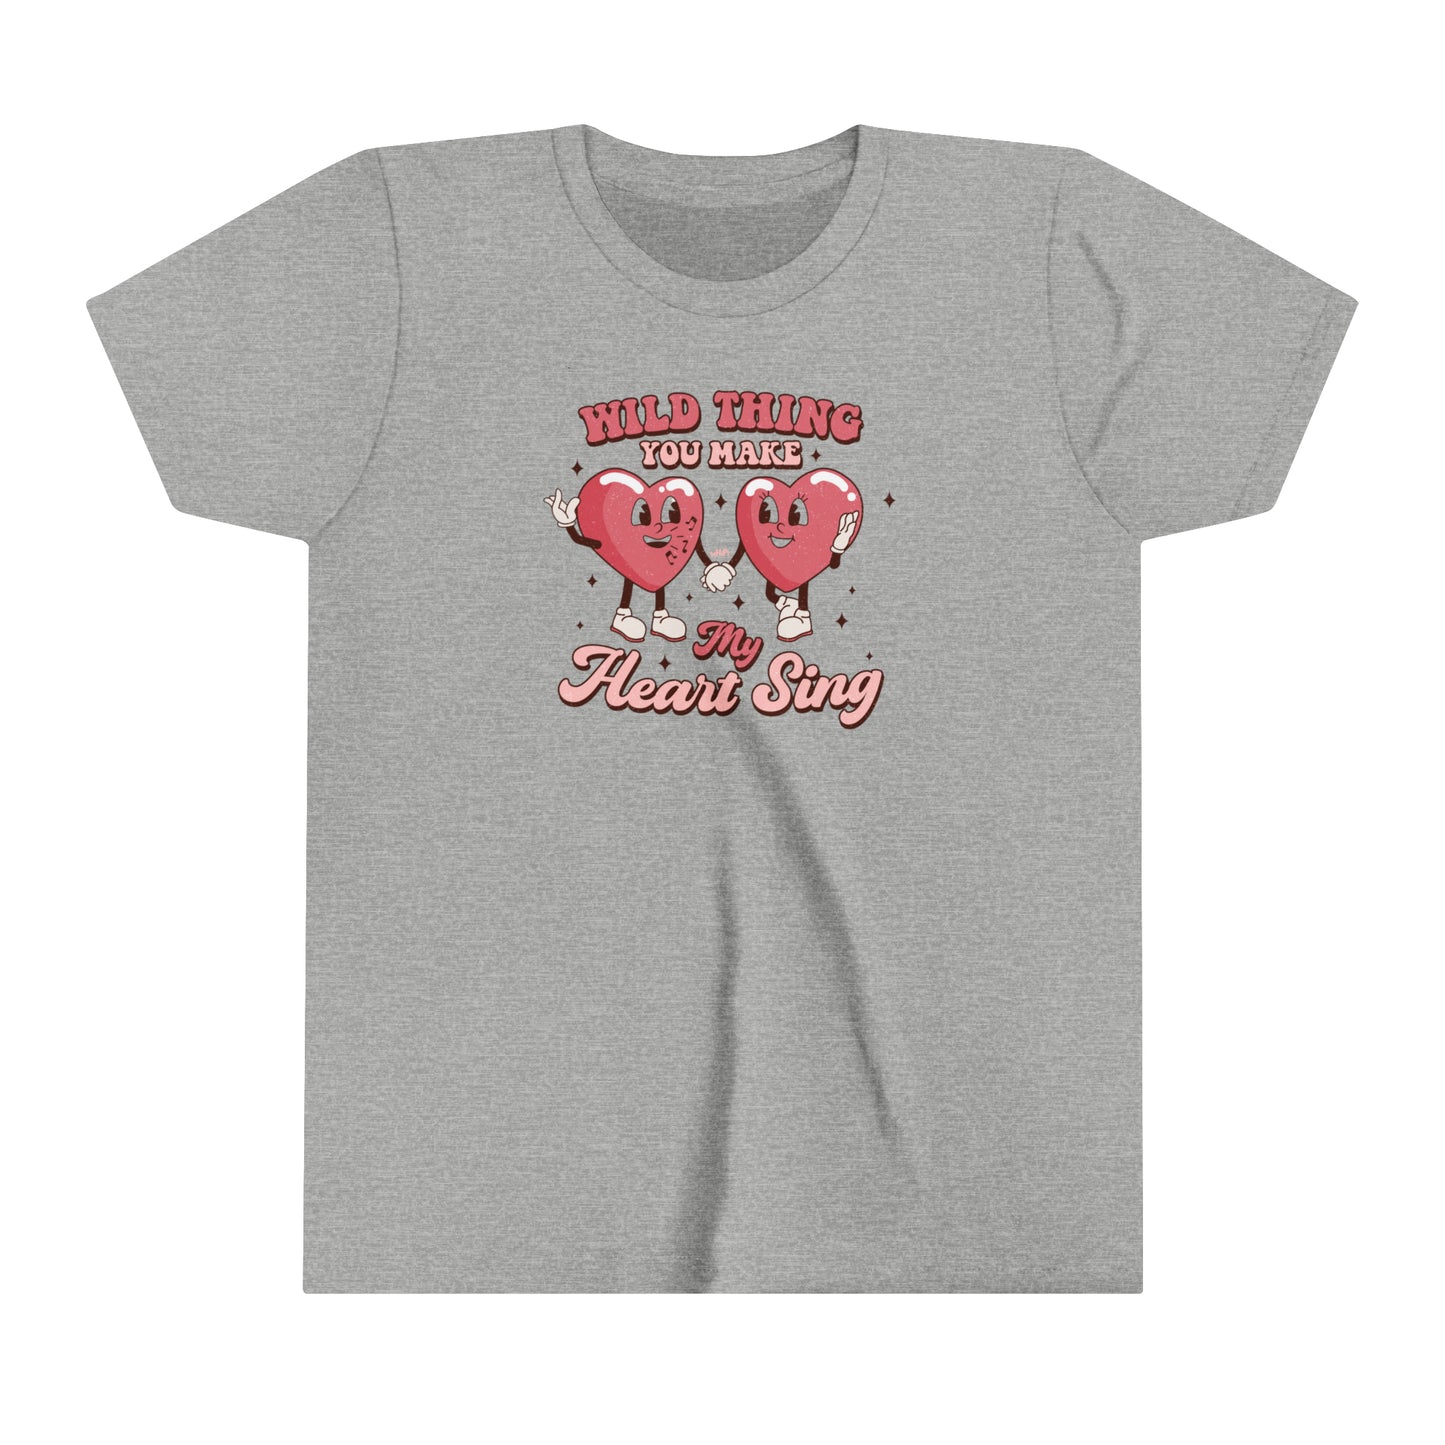 Youth Wild Thing Short Sleeve Tee